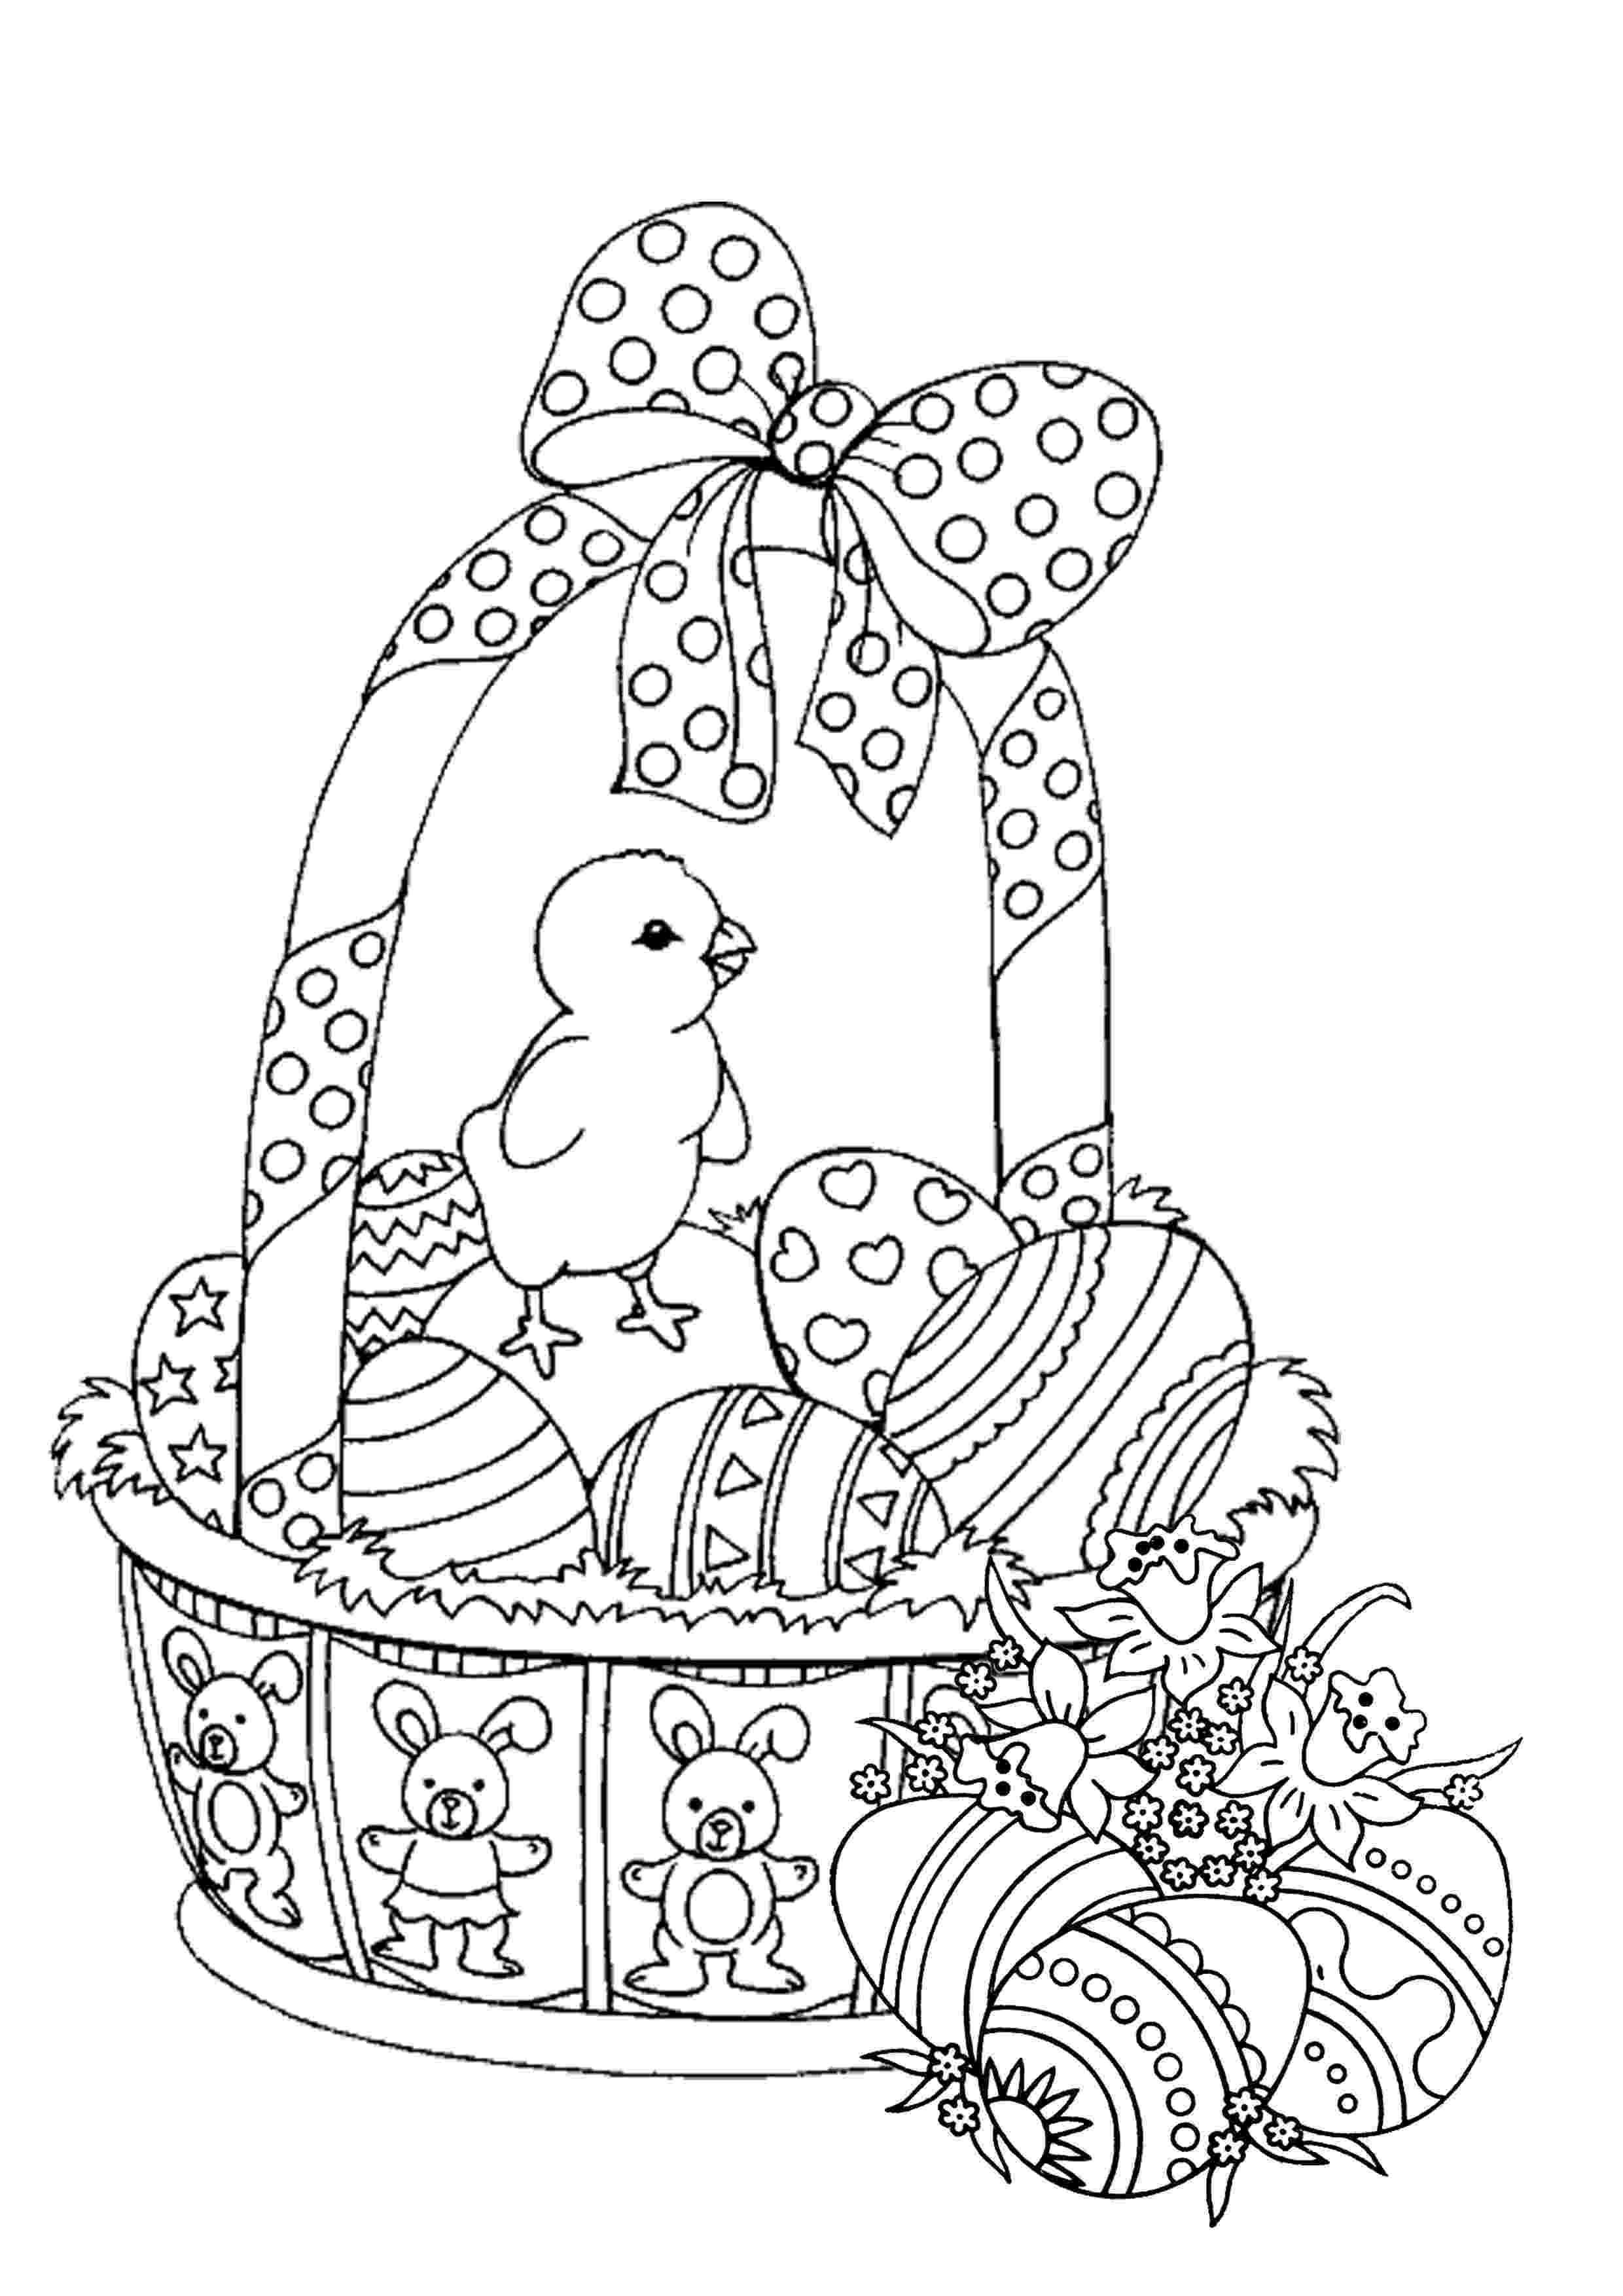 easter bunny basket coloring page easter bunny and basket coloring pages getcoloringpagescom page easter basket coloring bunny 